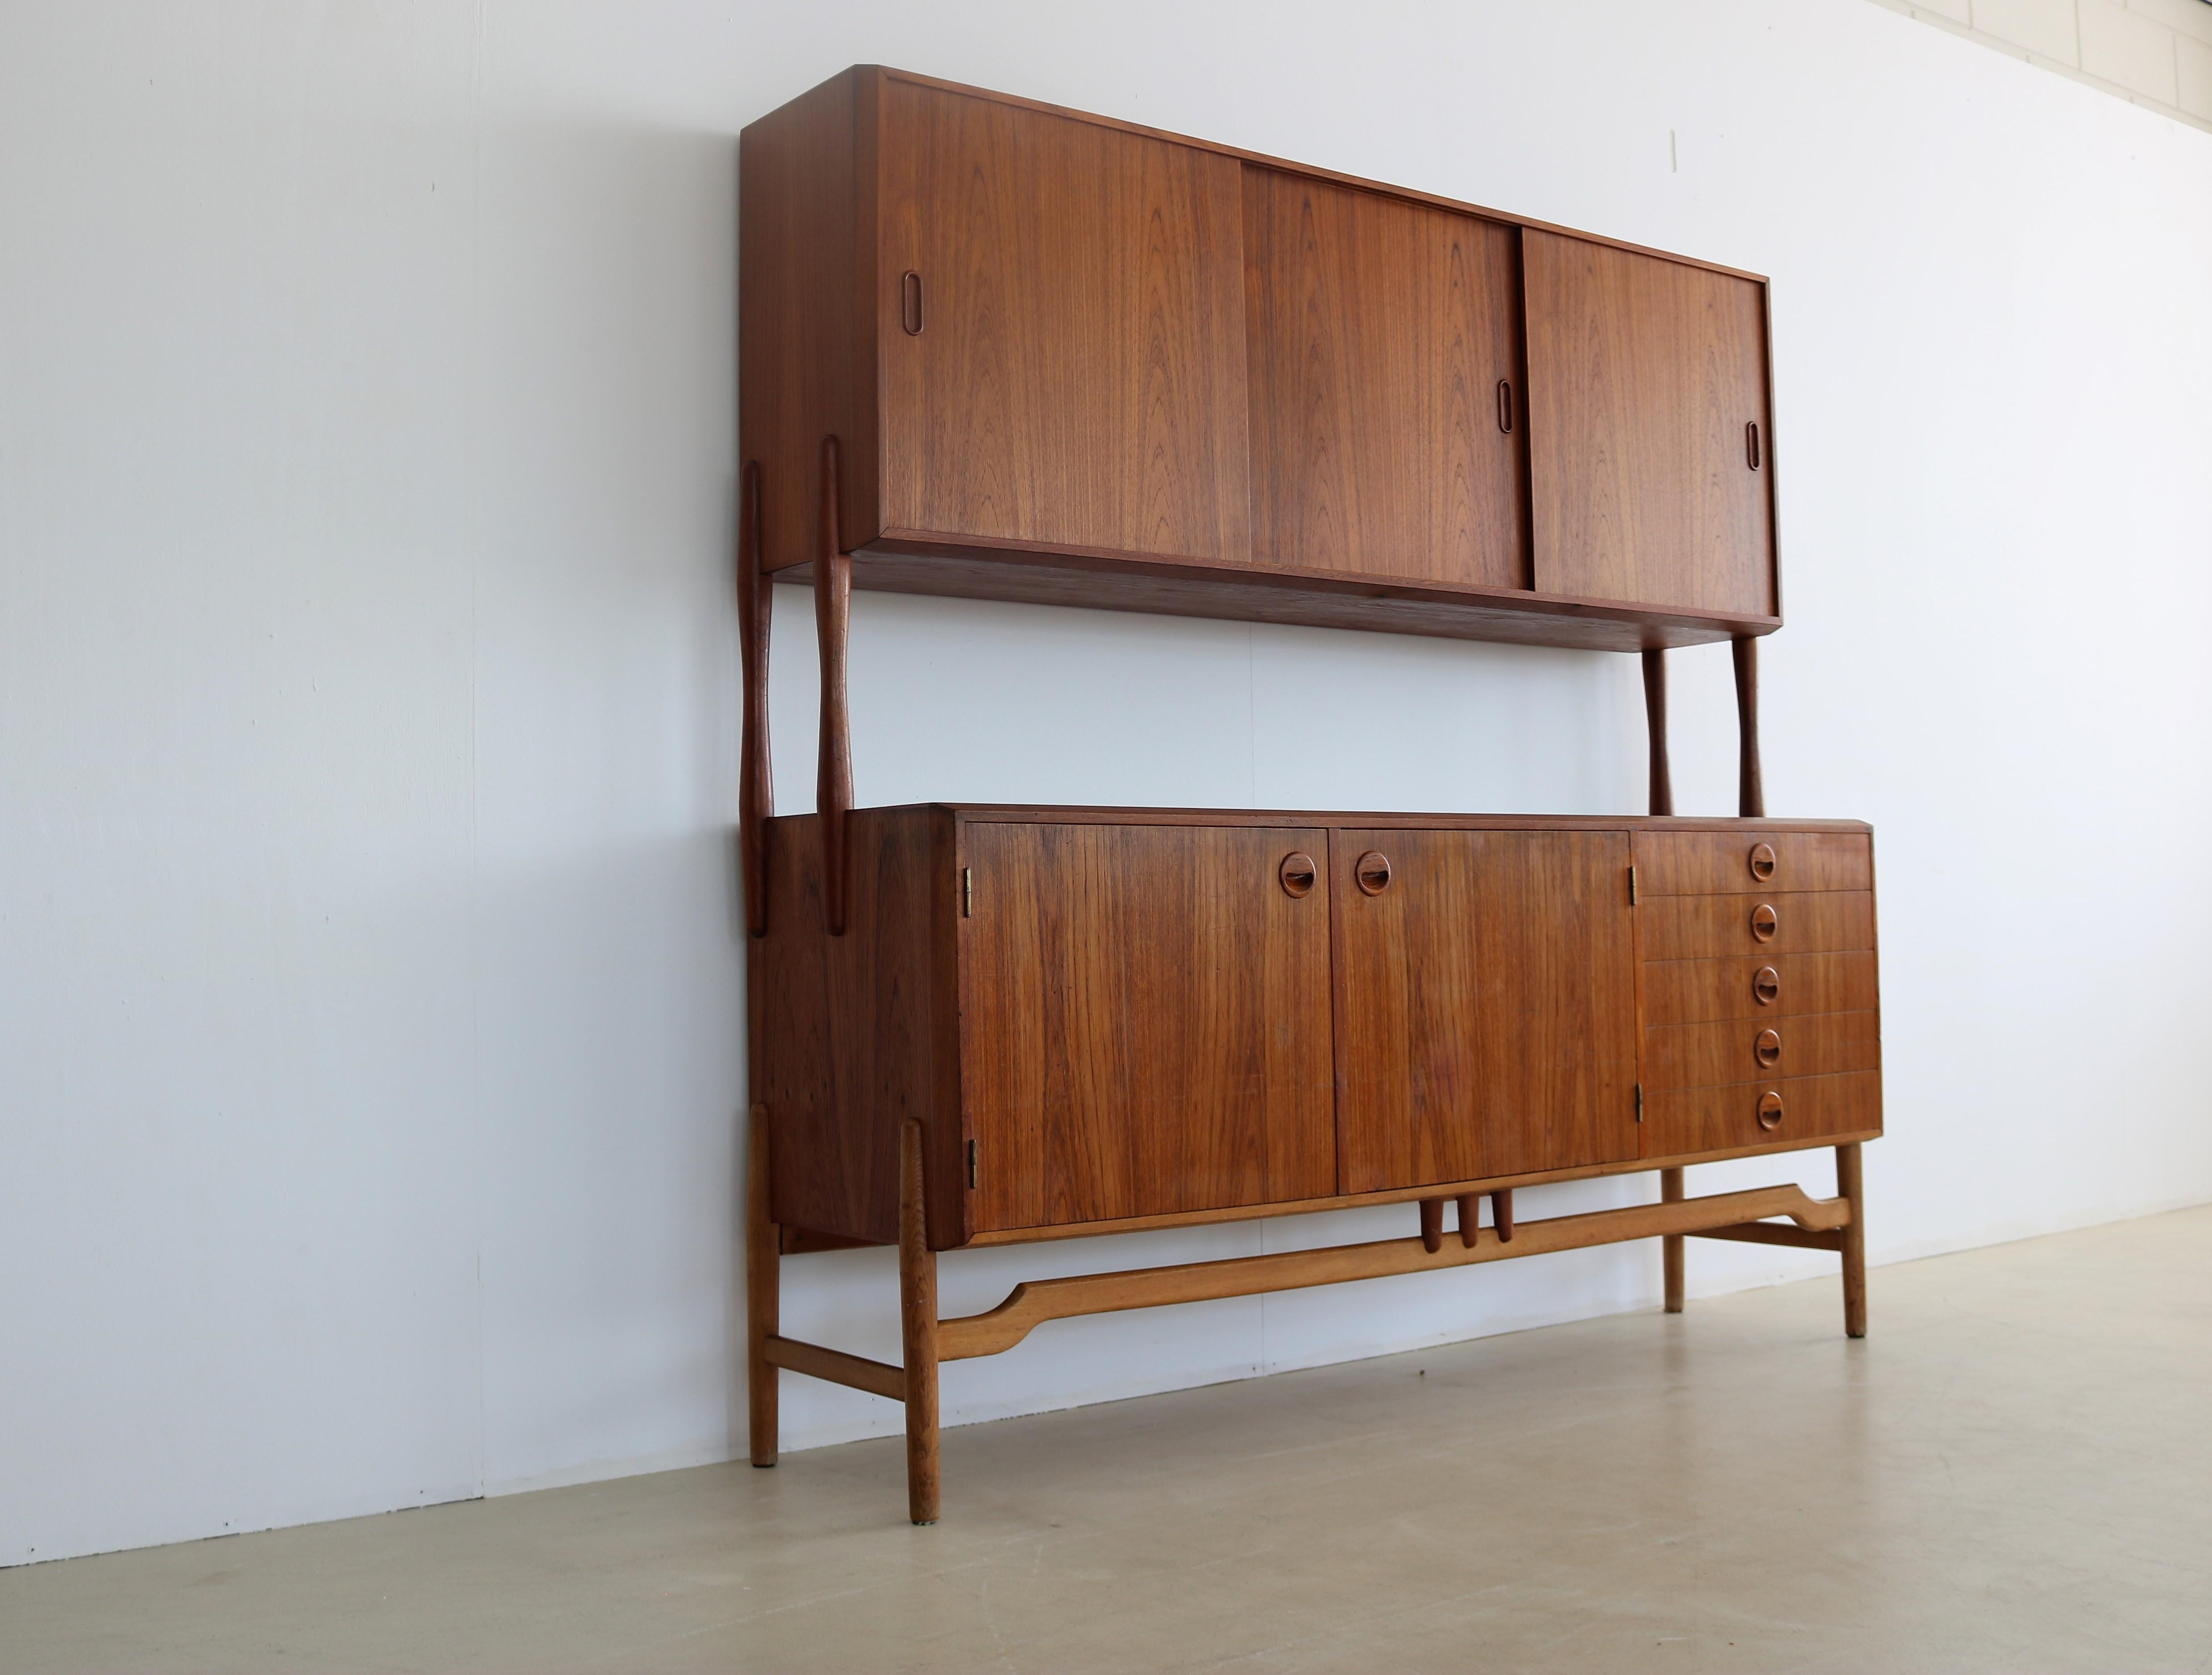 Finnish Vintage High Board Wall Unit Ahlstrom Osakeyhtio For Sale